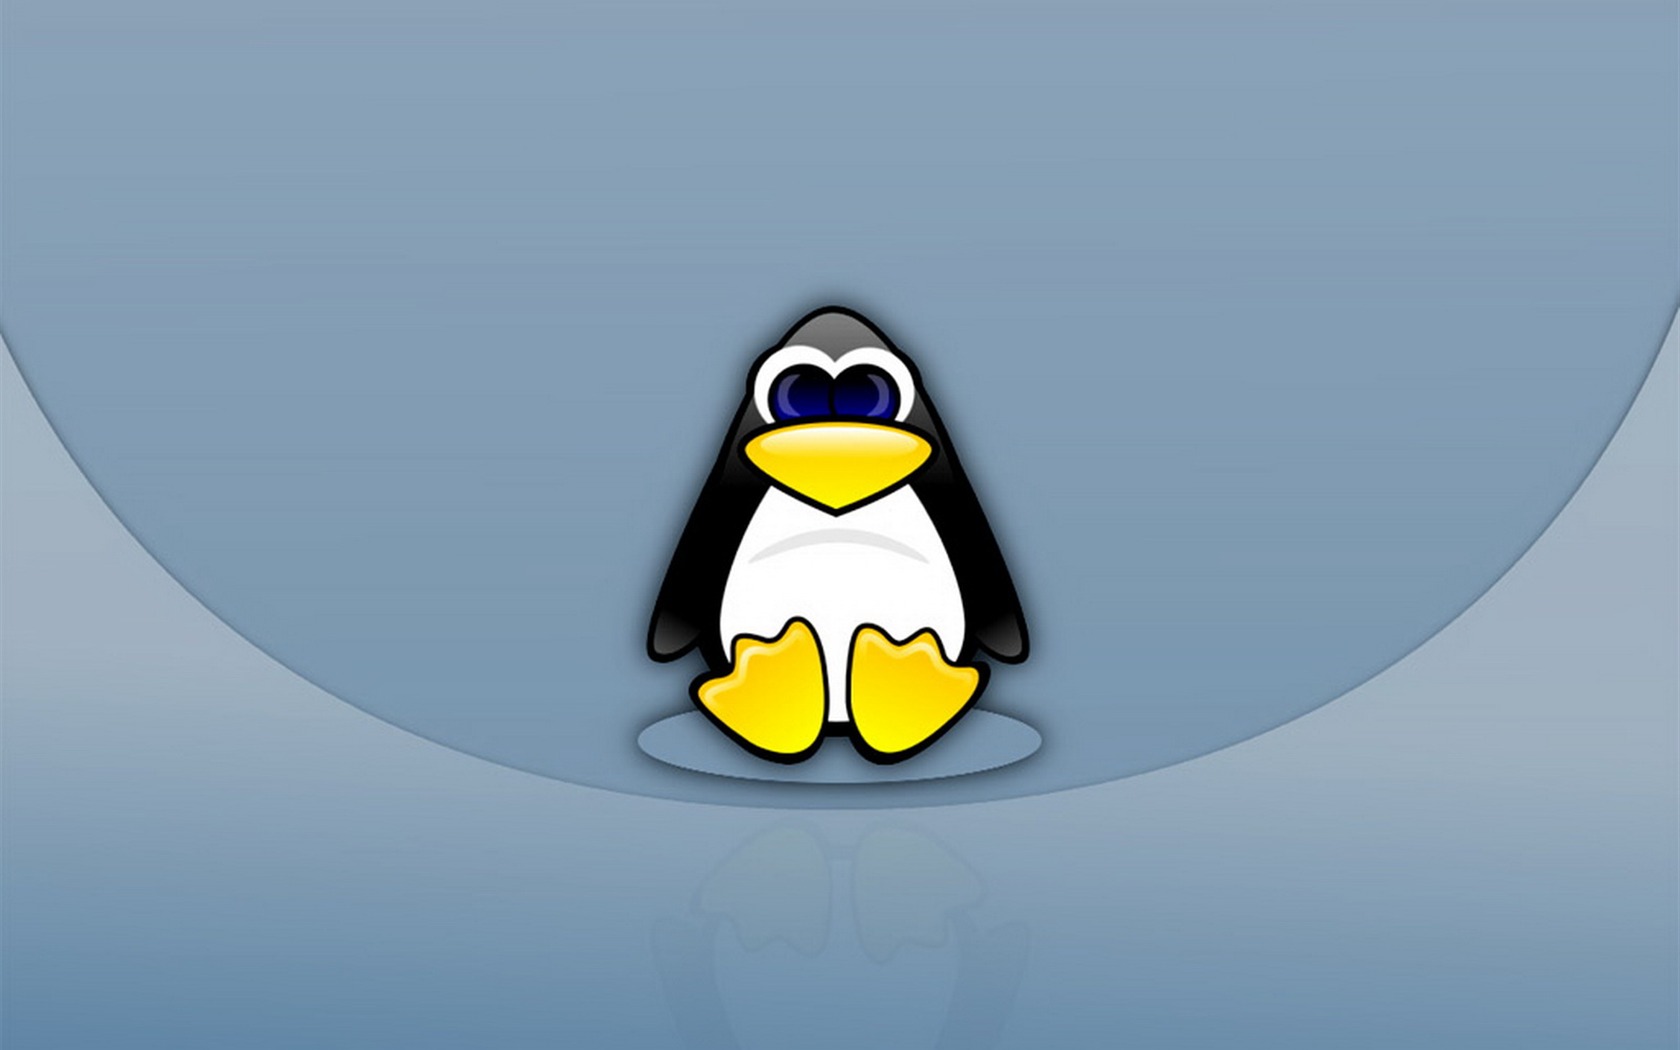 Linux tapety (3) #4 - 1680x1050